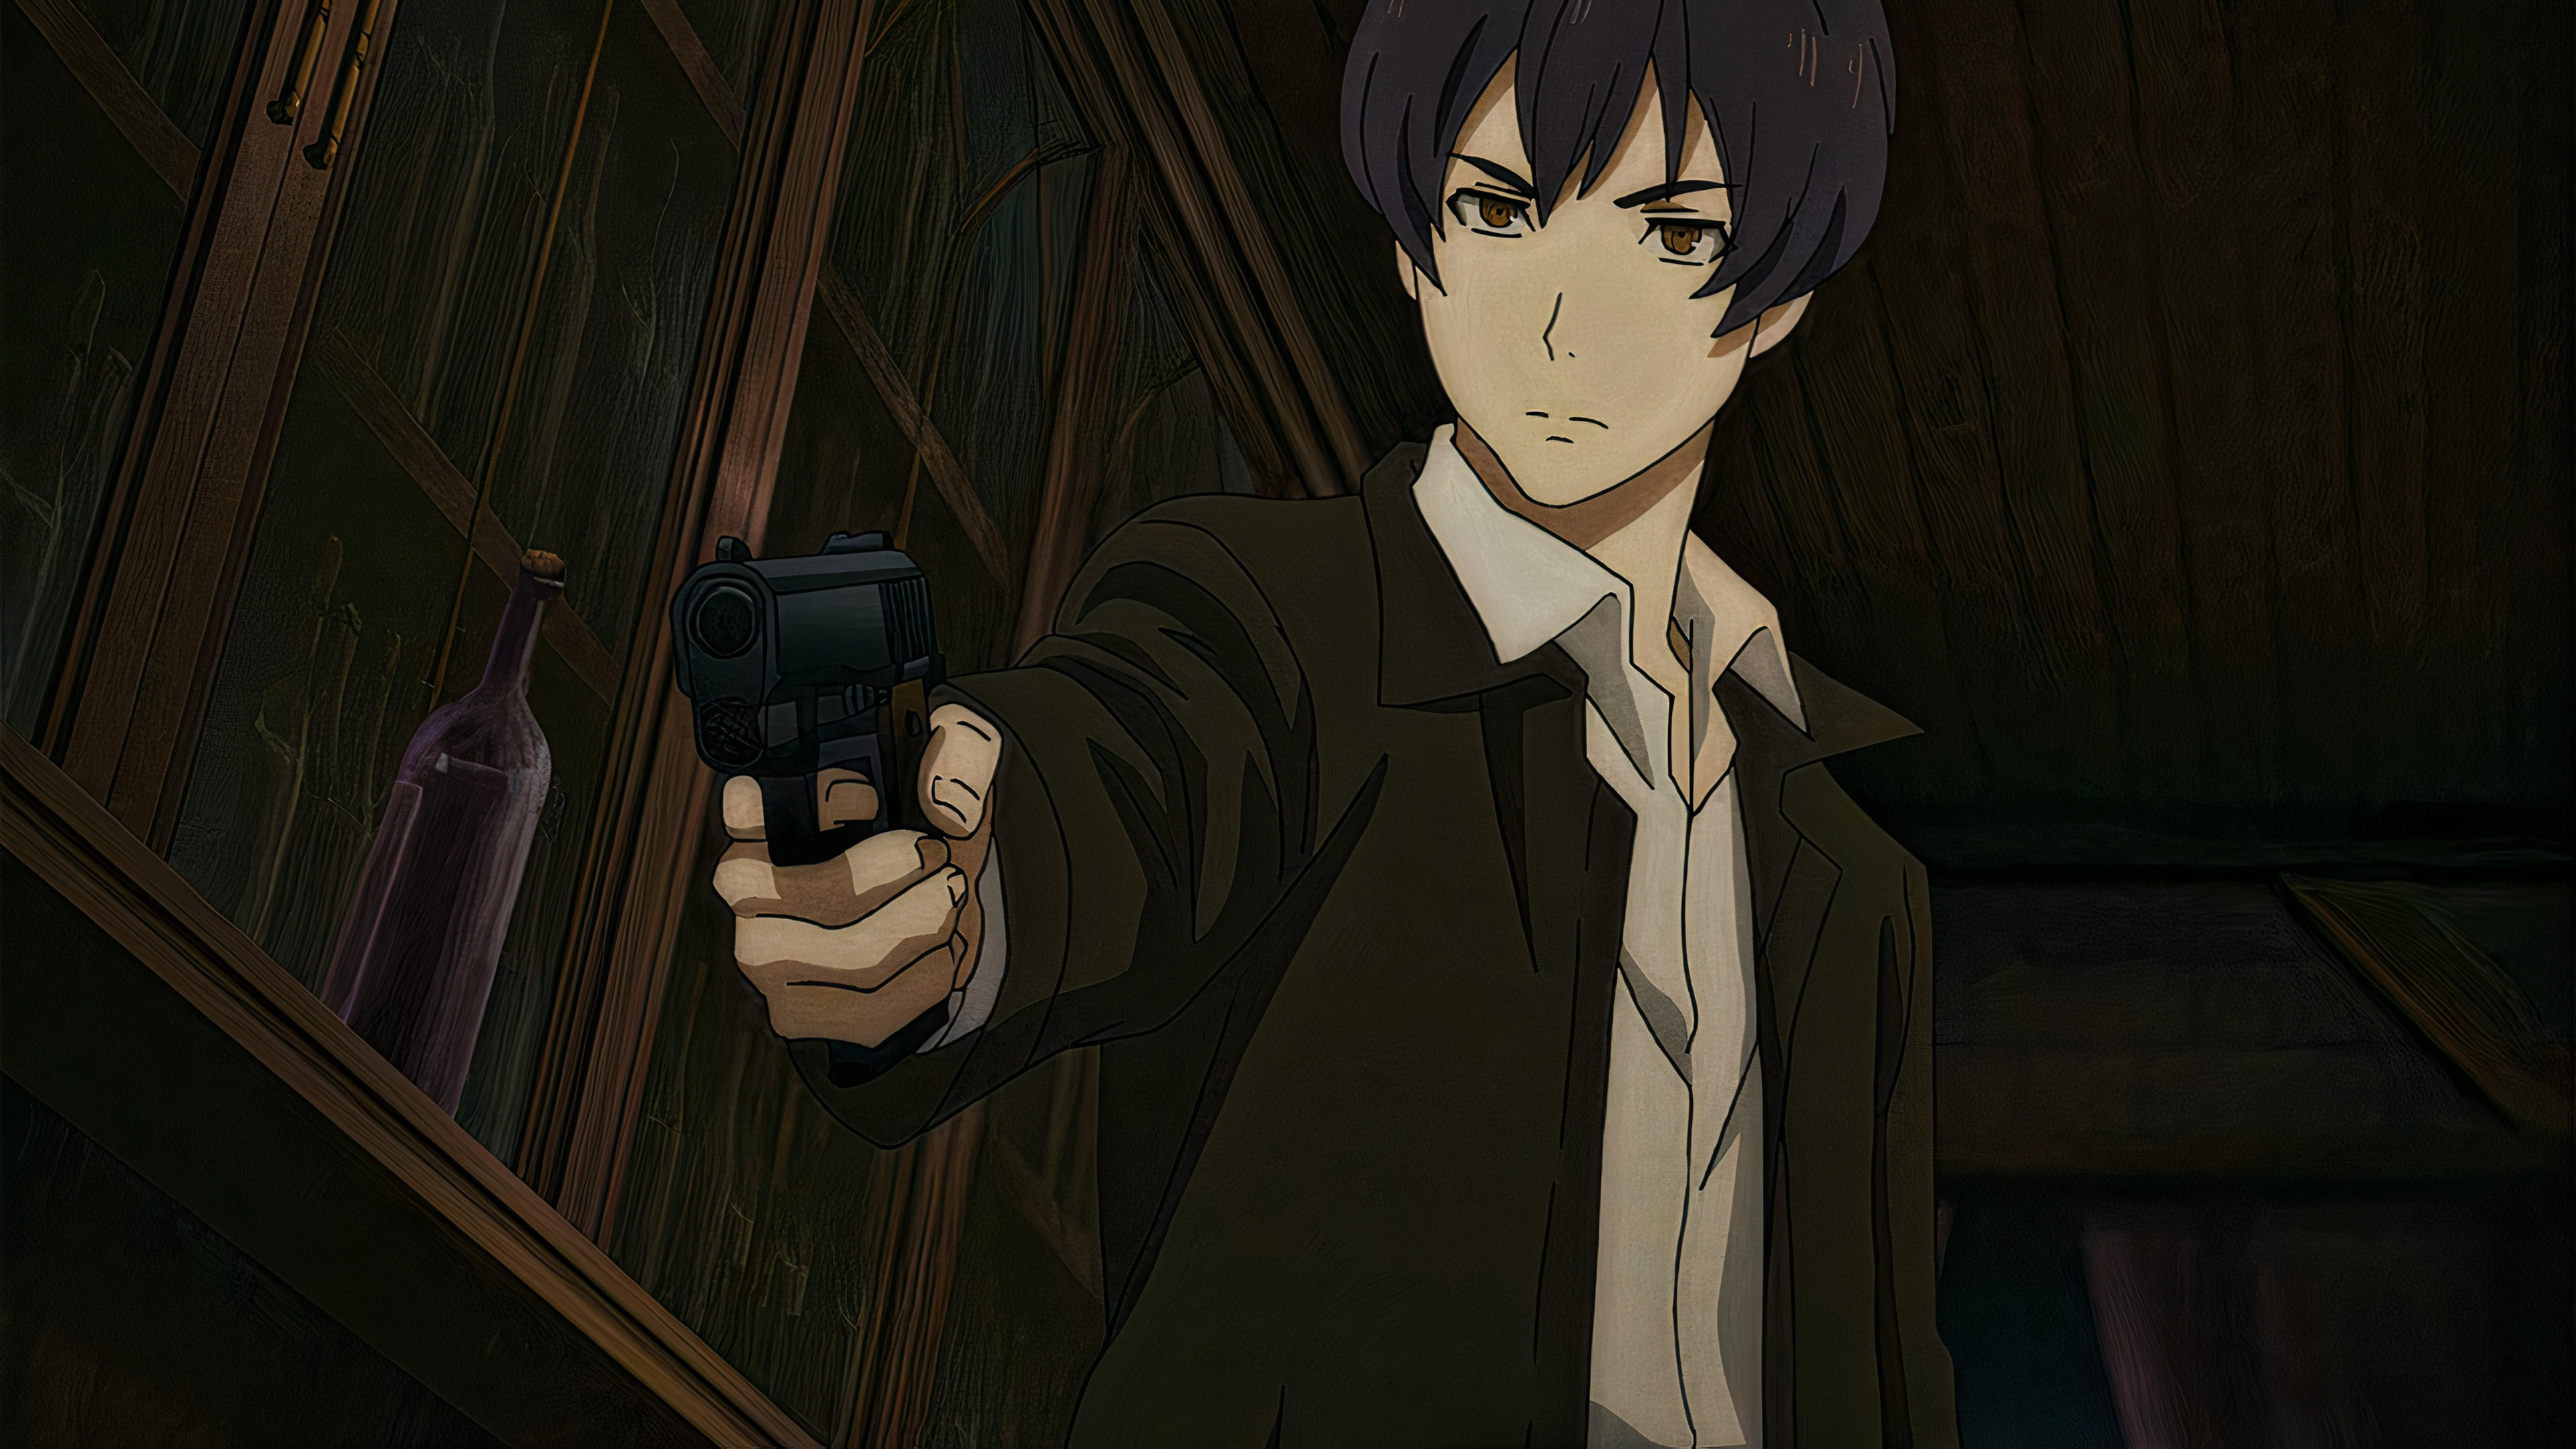 Anime 91 Days Picture - Image Abyss.